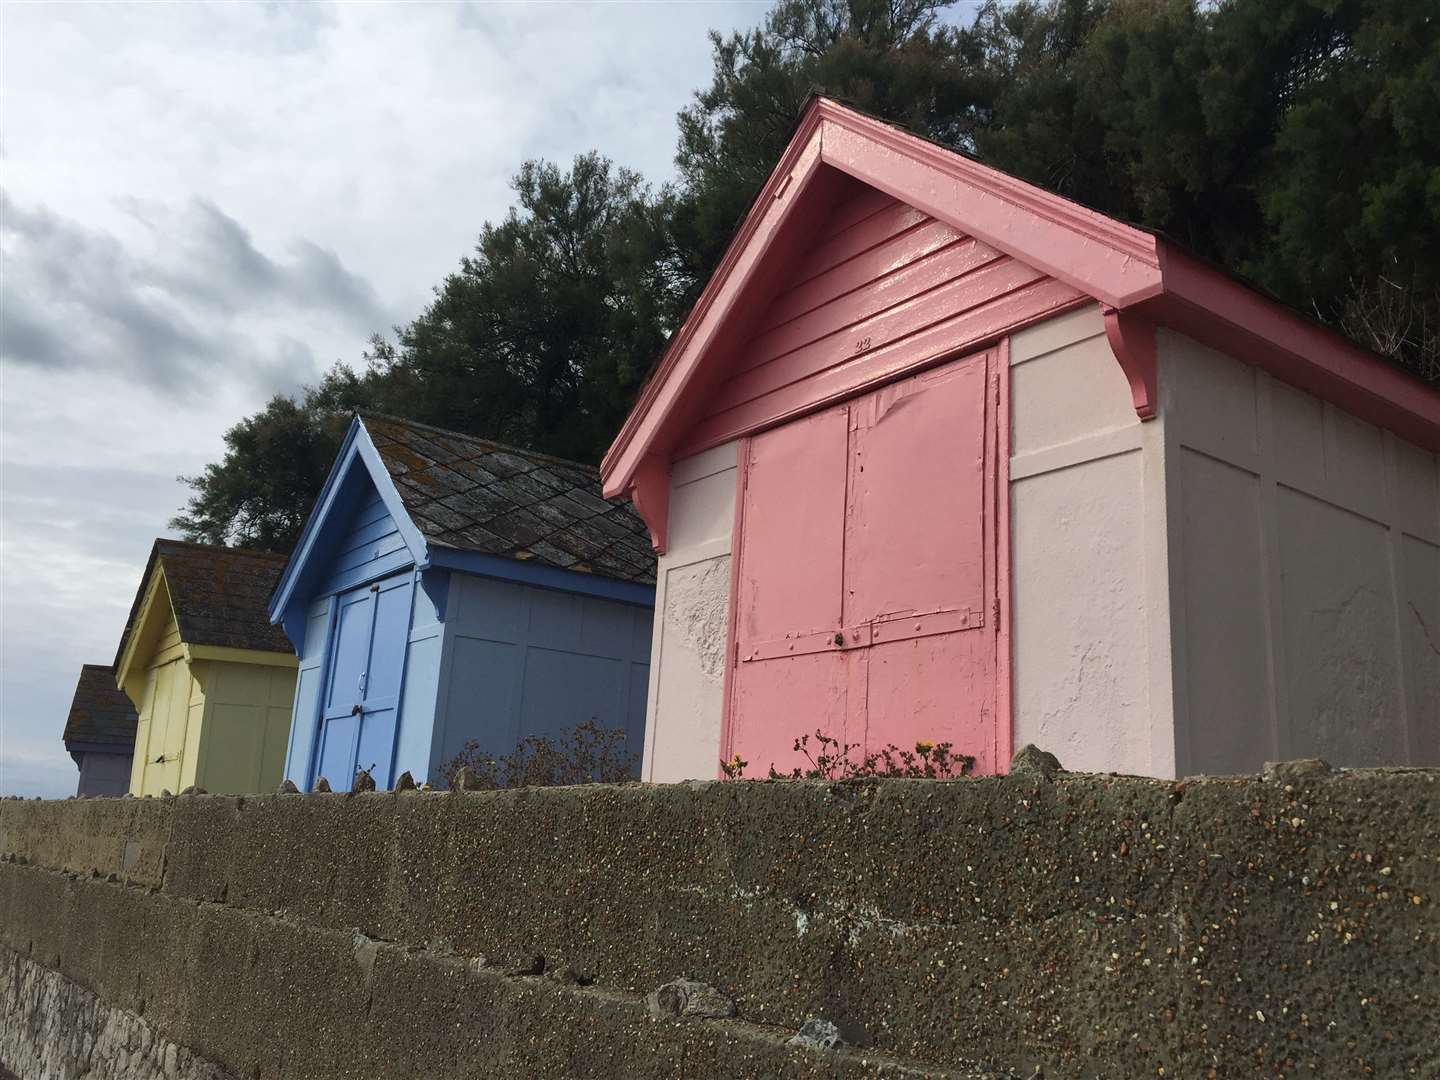 The beach hut scheme has now been approved by the planning committee